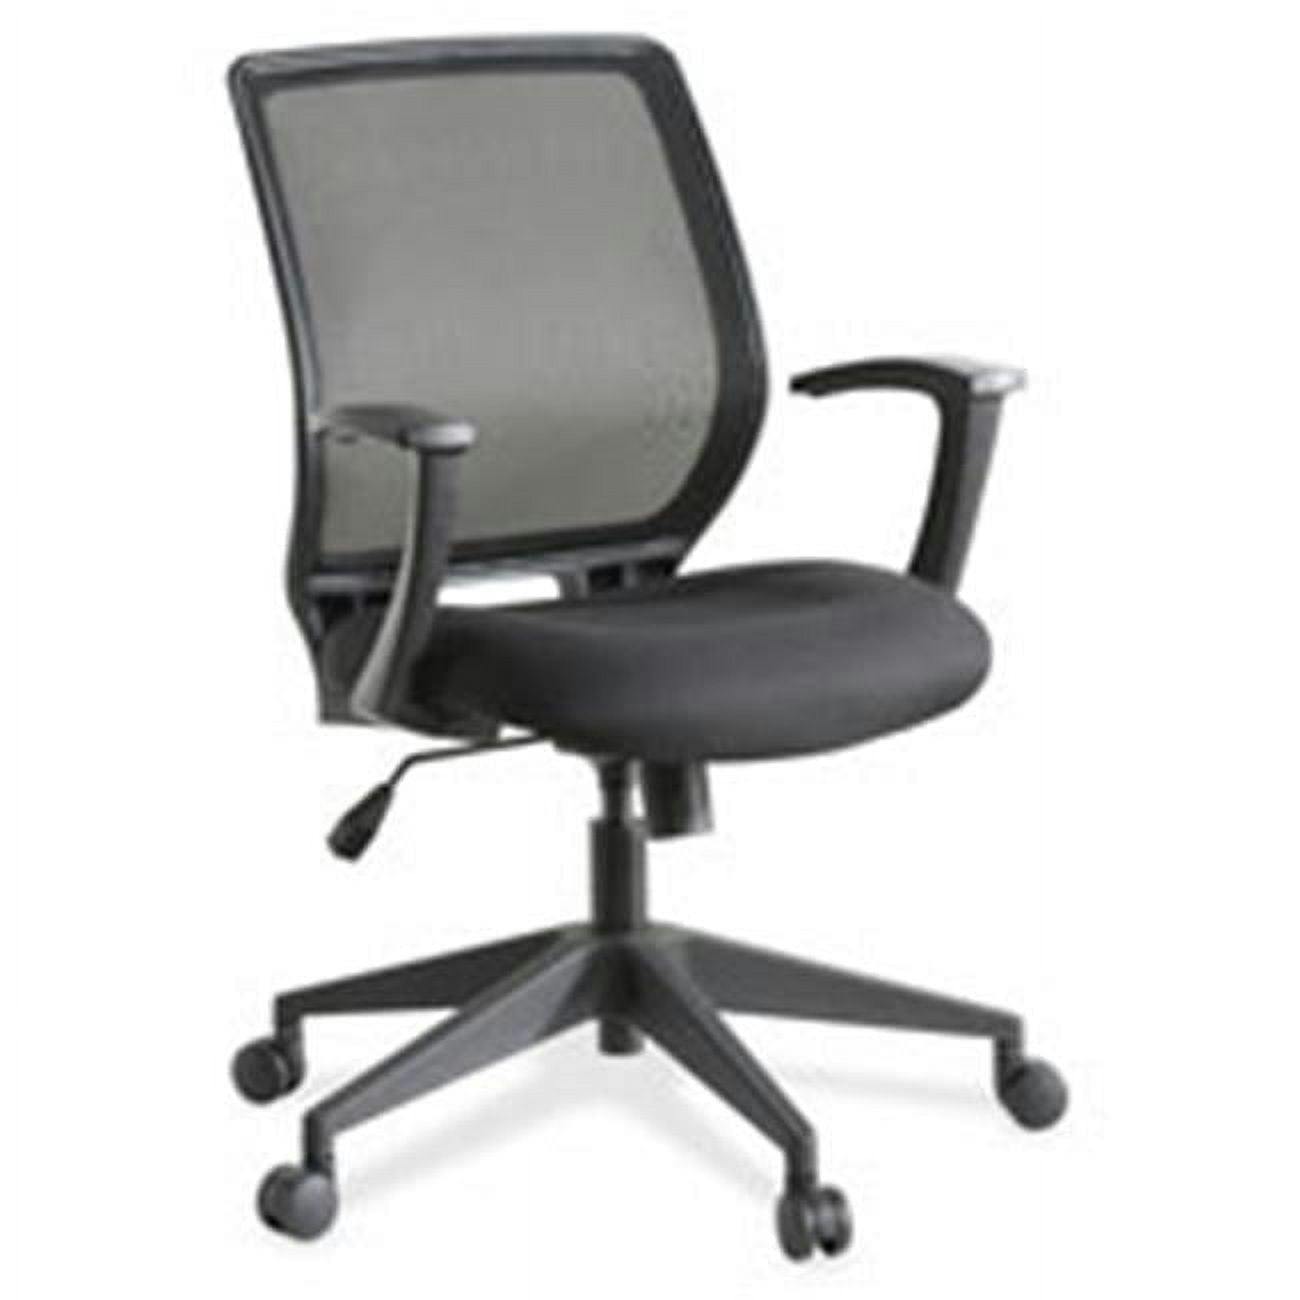 Executive Mid-Back Mesh Chair with Fixed Arms in Black